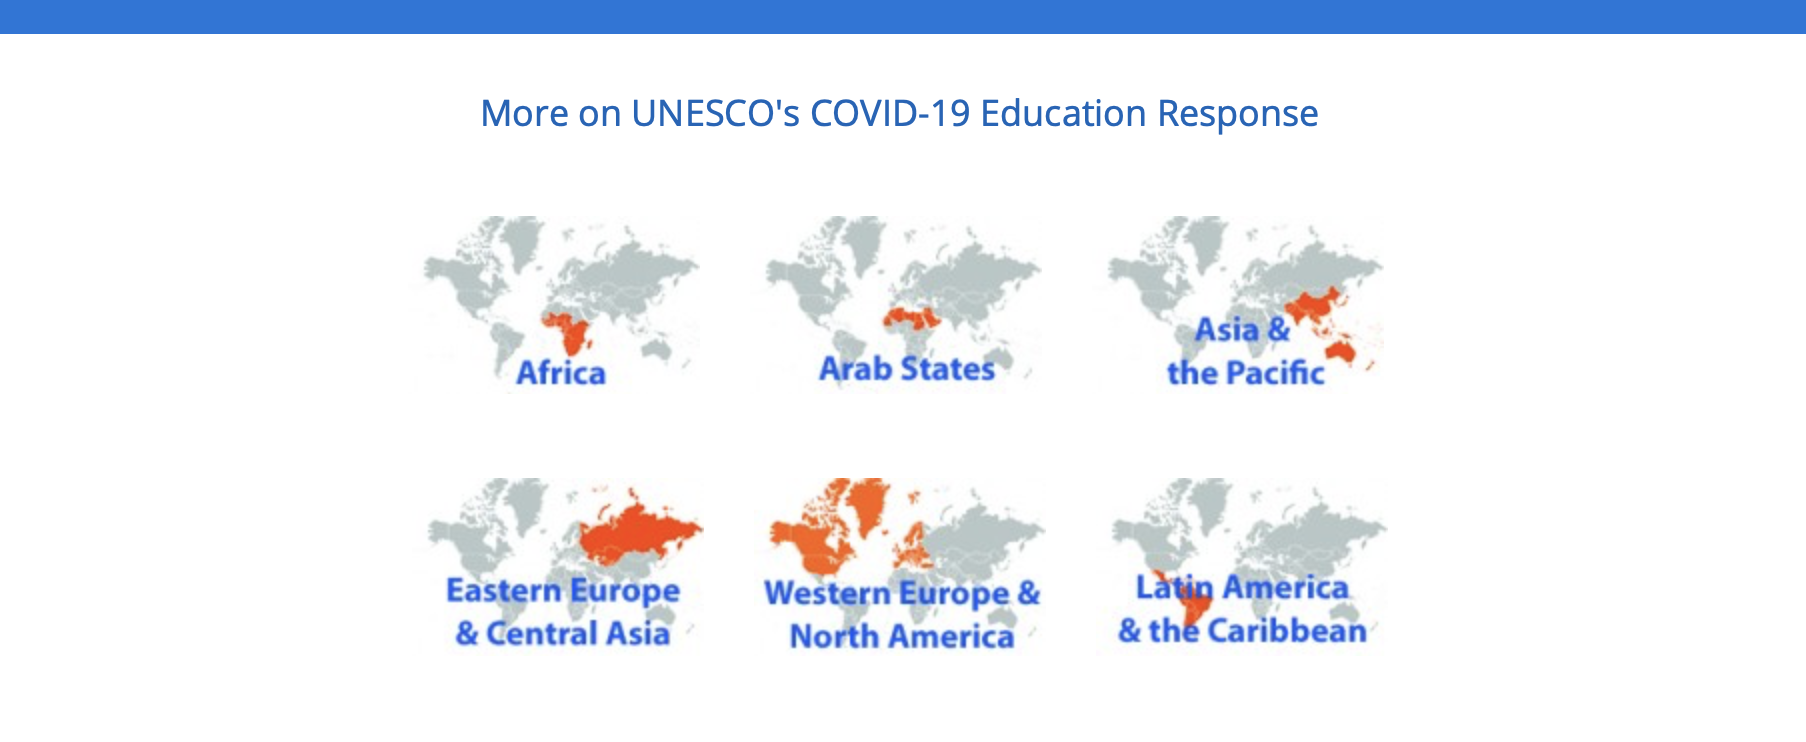 UNESCO’s leadership in mitigating the impact of Covid-19 on the educational development of the most vulnerable communities: countries’ situation